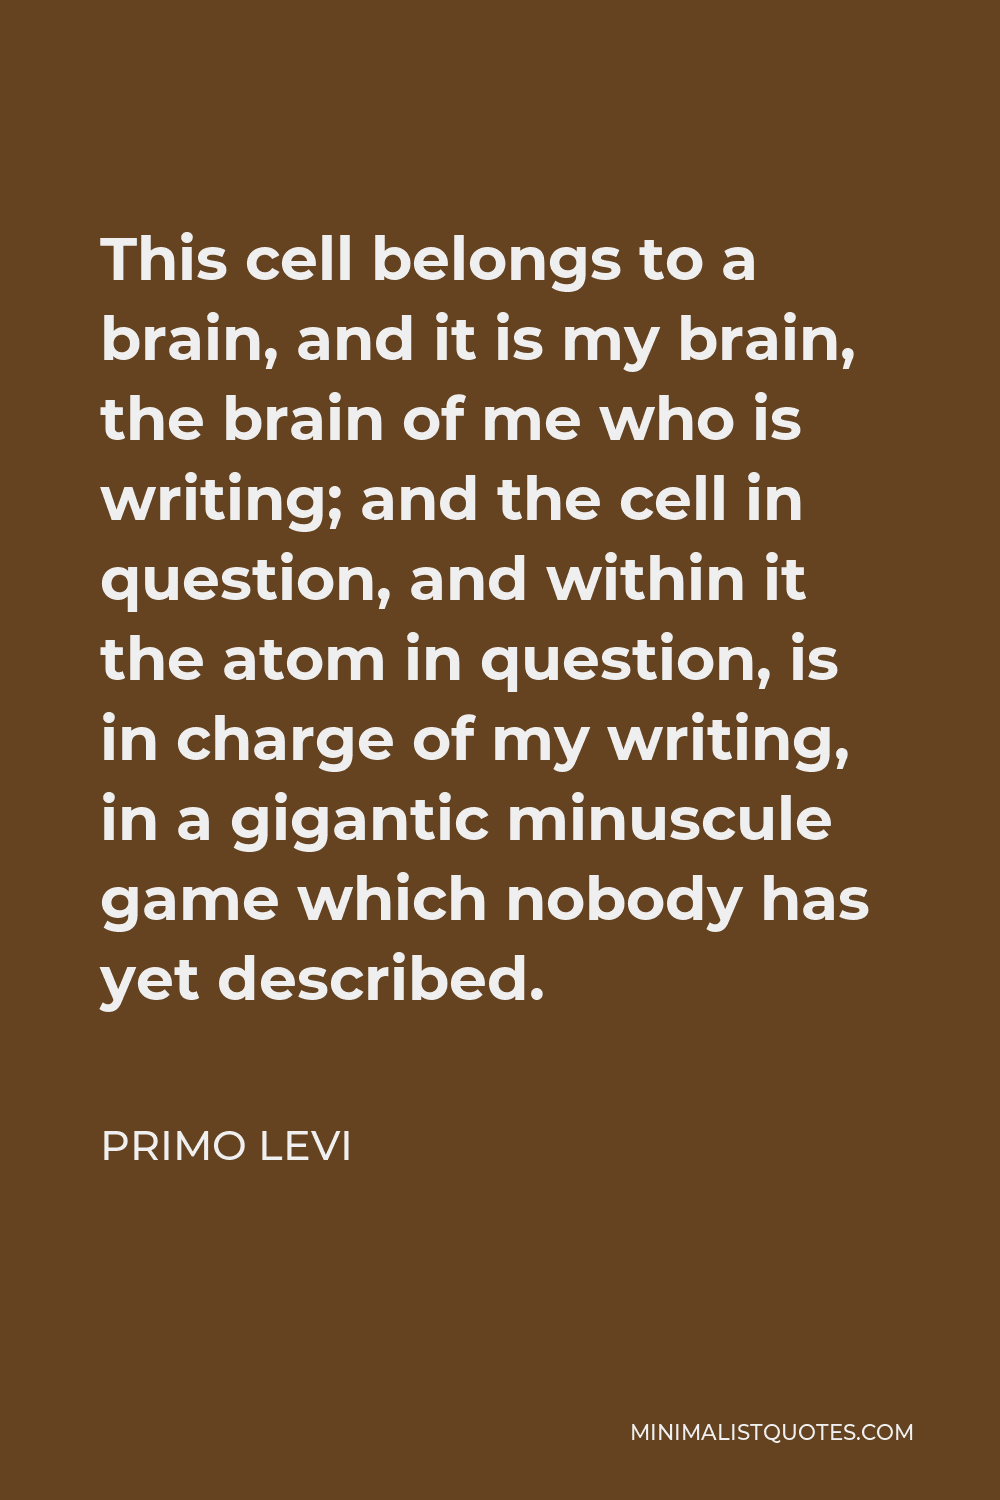 Primo Levi Quote - This cell belongs to a brain, and it is my brain, the brain of me who is writing; and the cell in question, and within it the atom in question, is in charge of my writing, in a gigantic minuscule game which nobody has yet described.